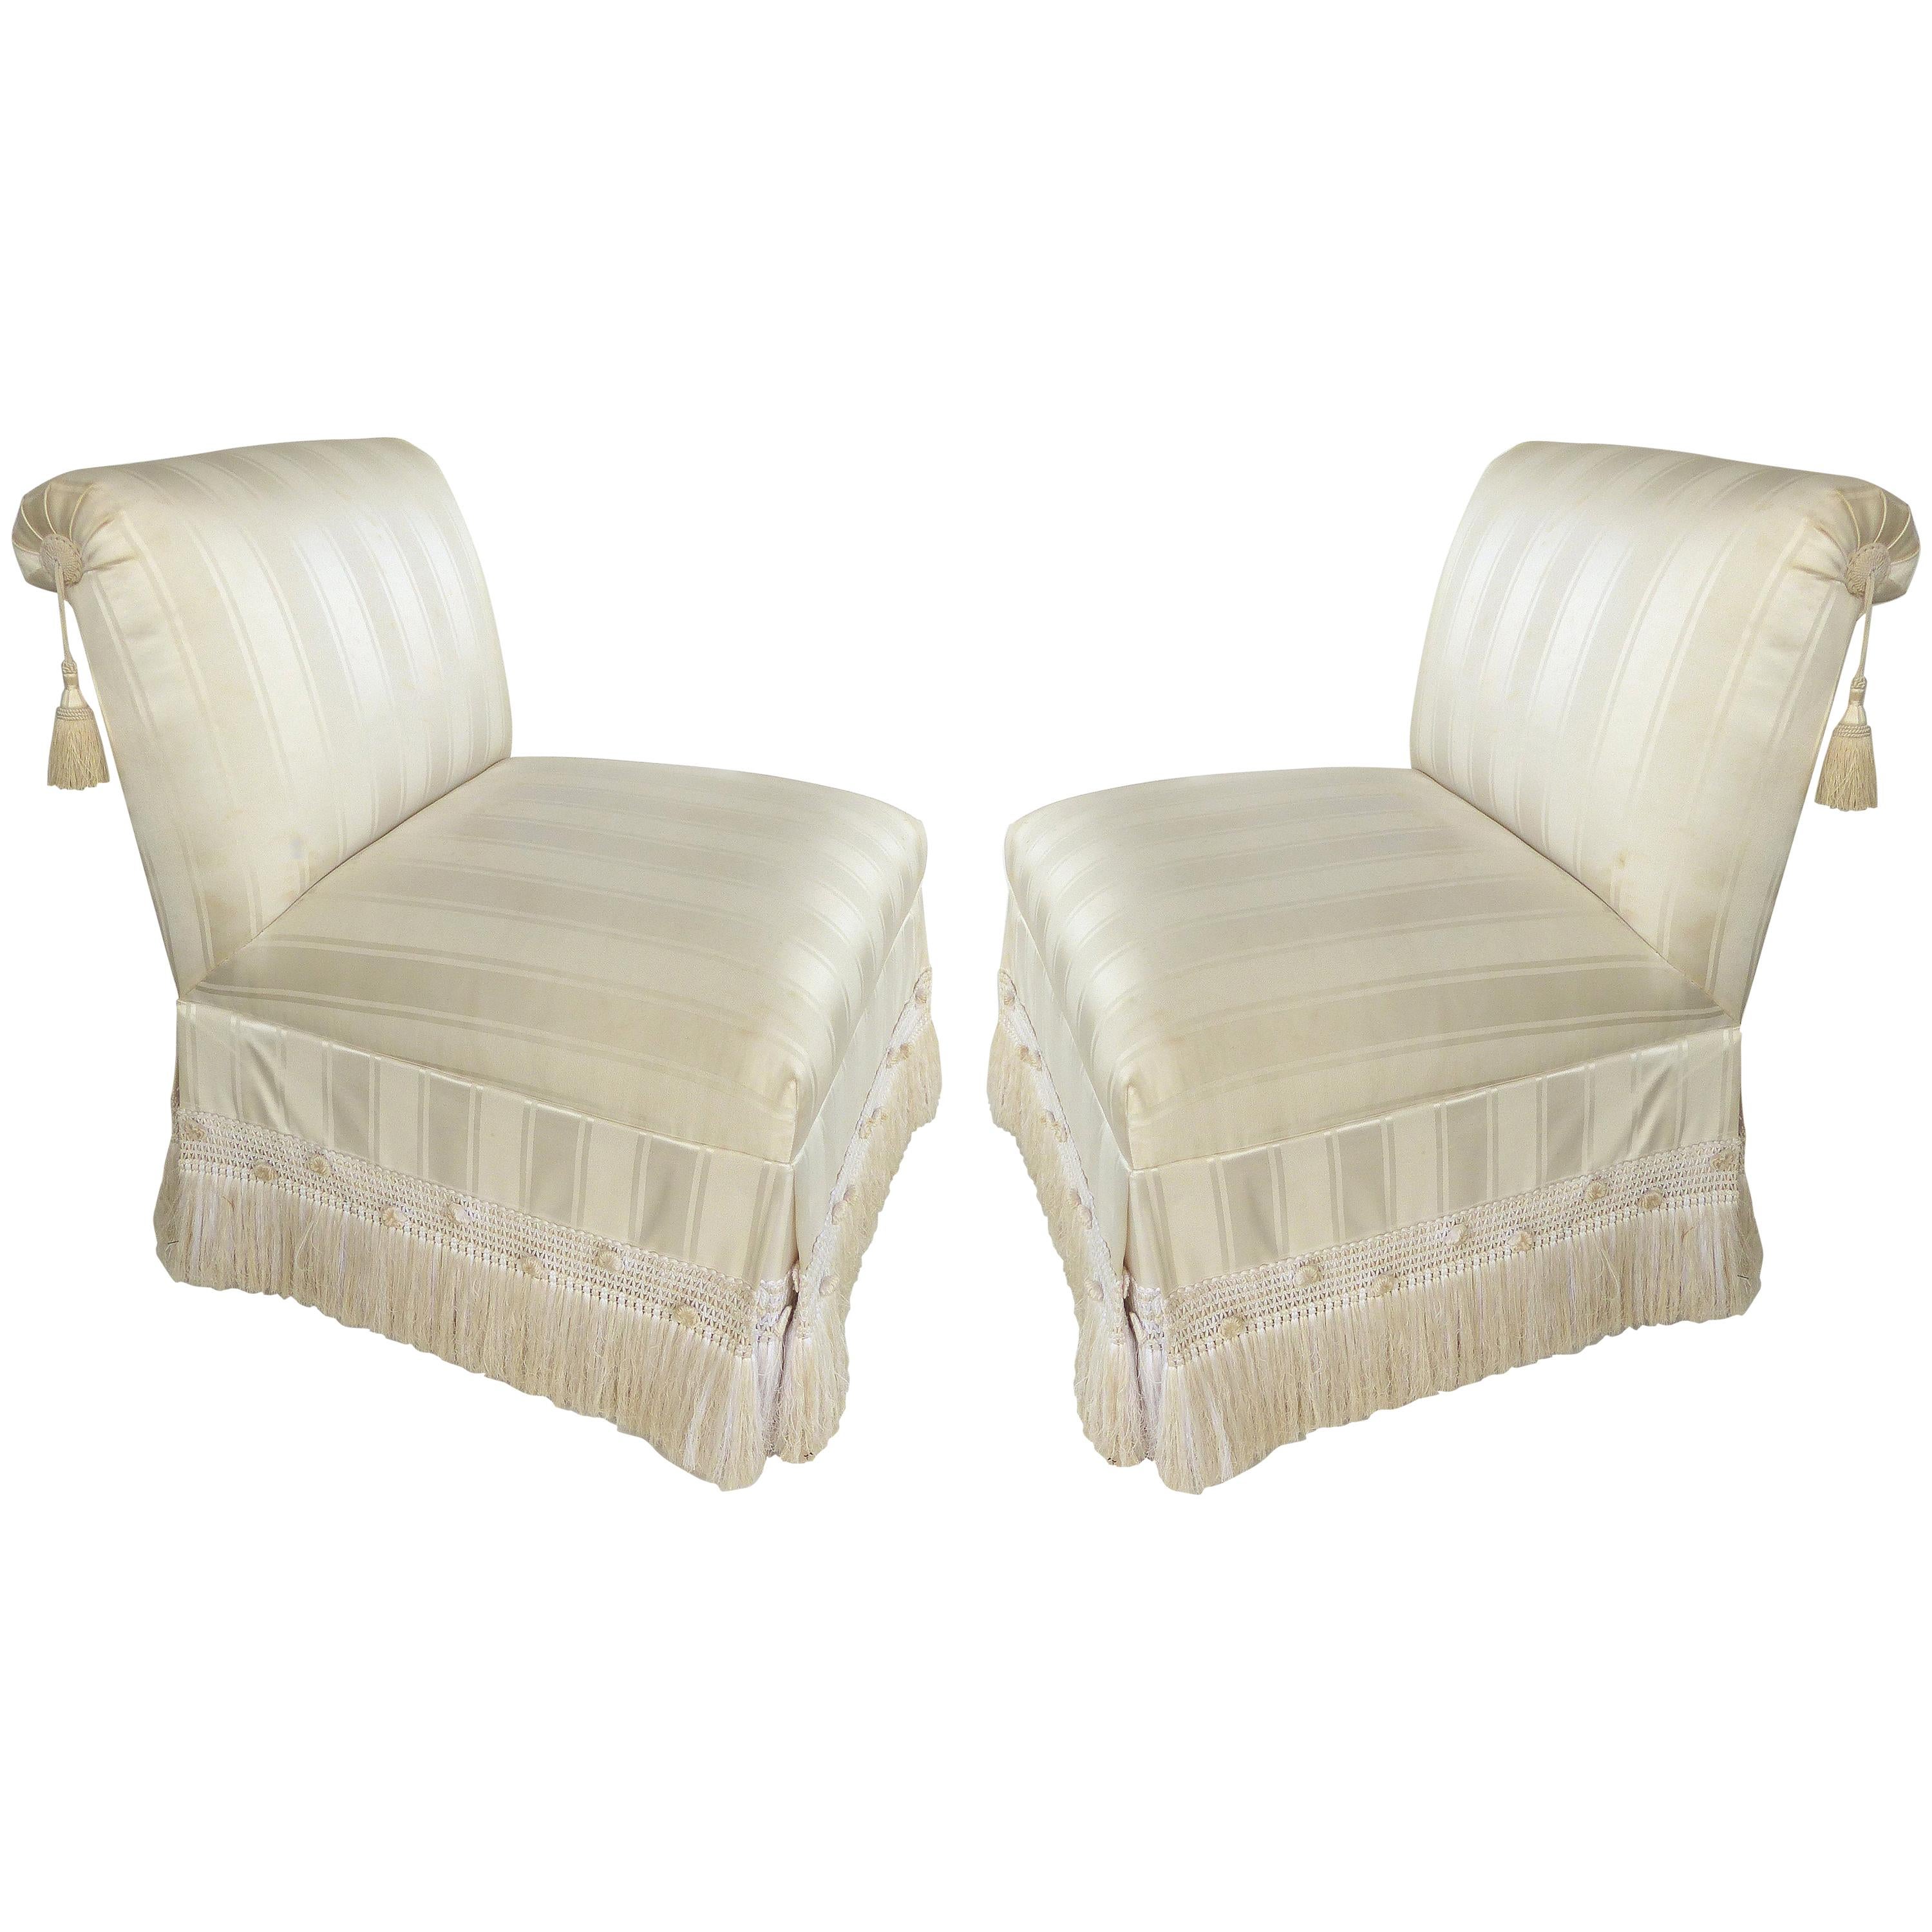 Custom Upholstered Slipper Chairs with Trim and Tassels, Pair